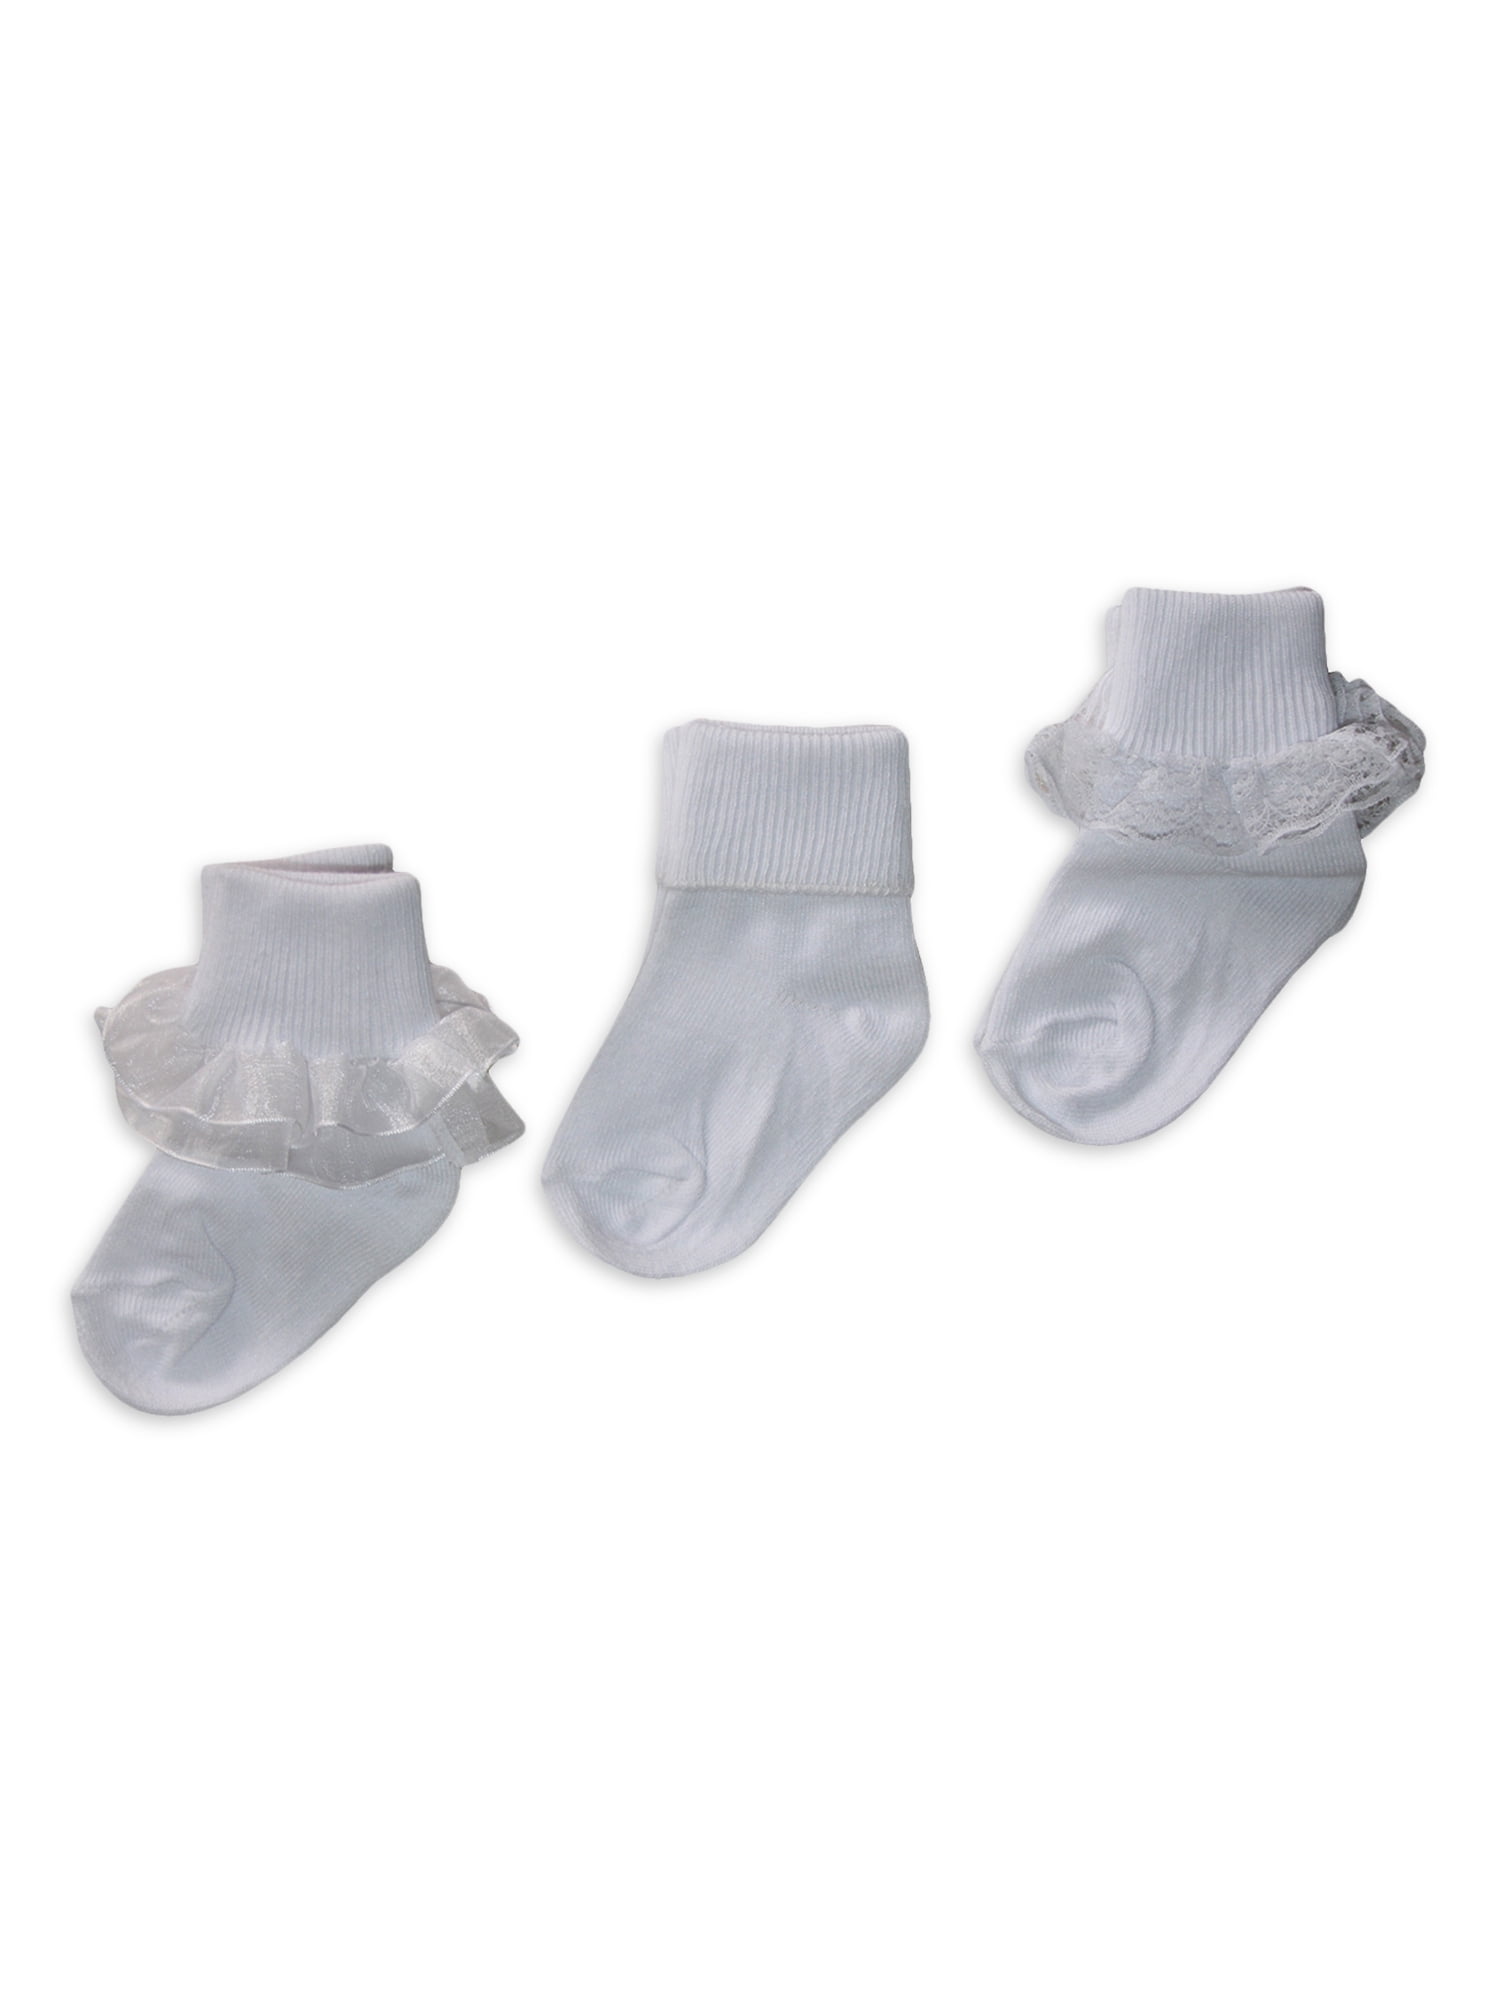 Wonder Nation Baby and Toddler Lace Socks, 3 Pairs